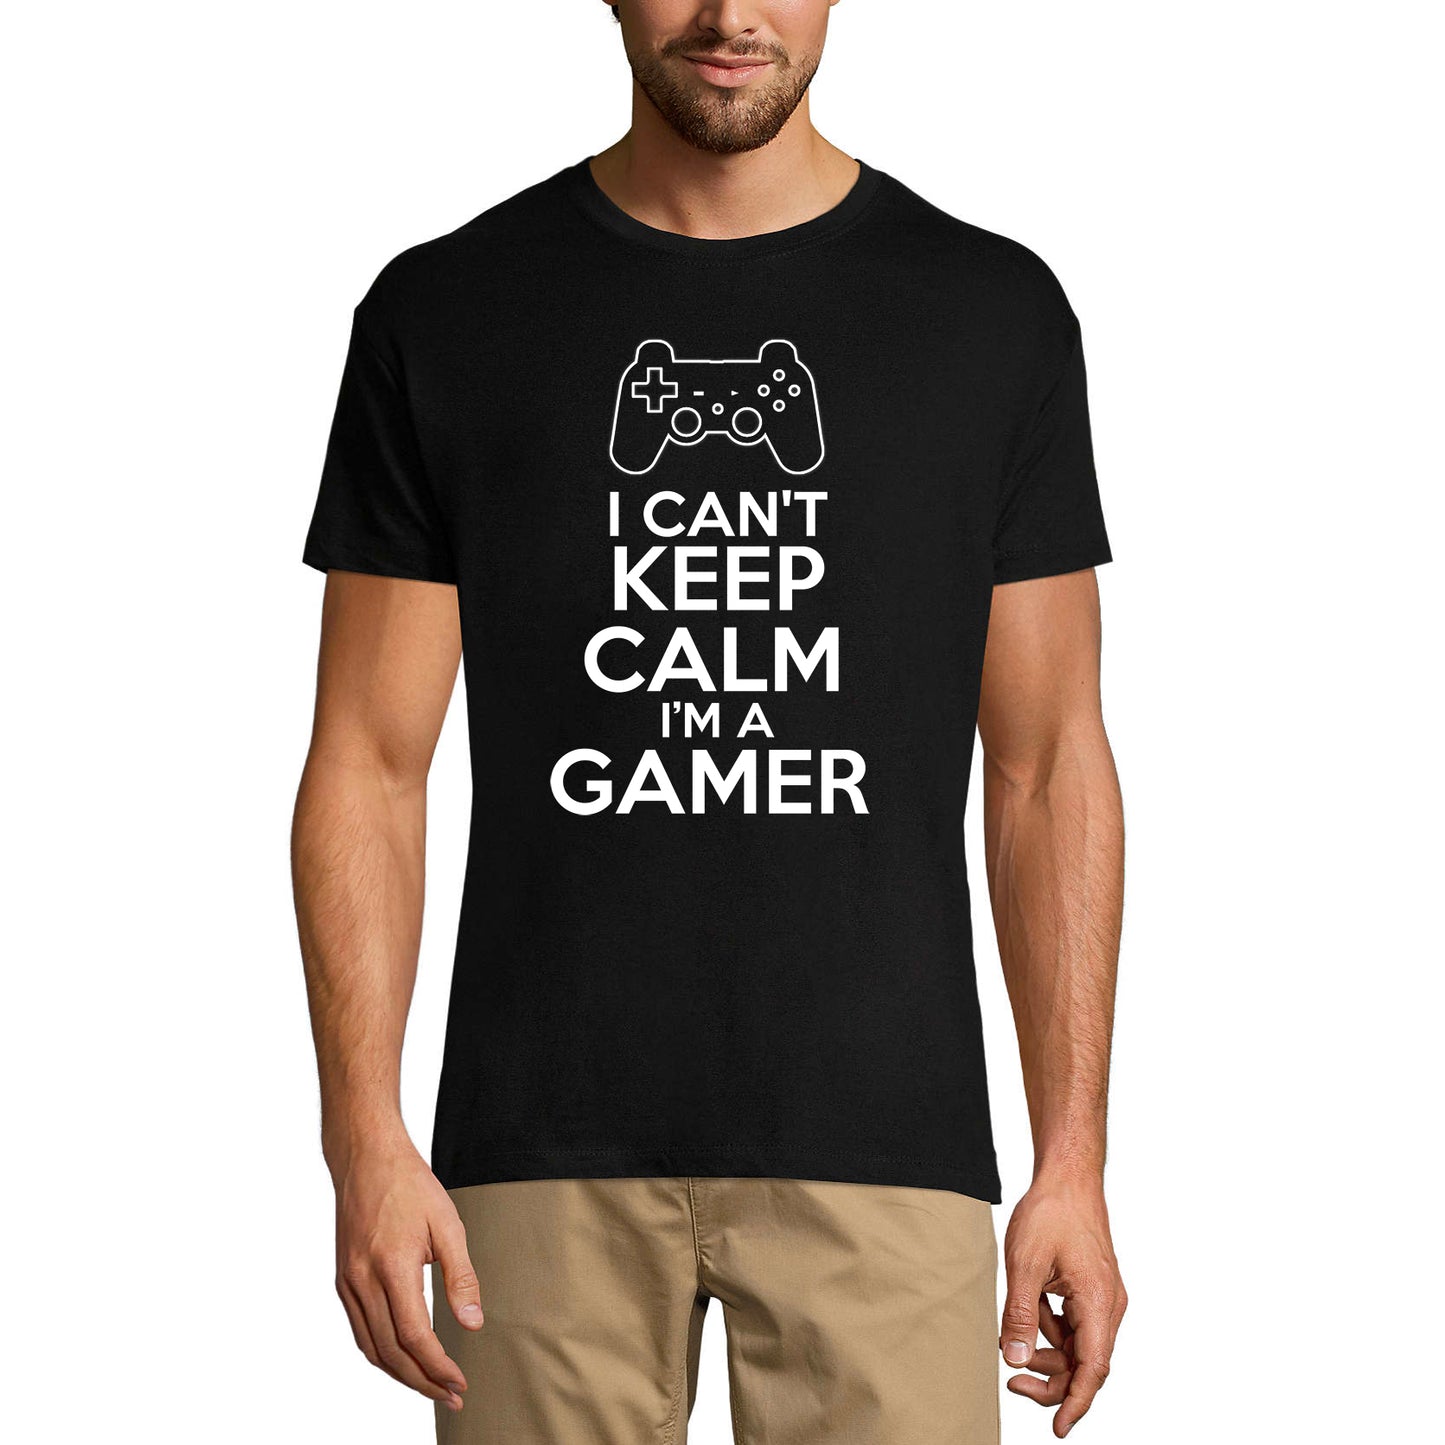 ULTRABASIC Graphic Men's T-Shirt I Can't Keep Calm I'm a Gamer - Good Gaming keep calm i paused my game alien player ufo playstation tee shirt clothes gaming apparel gifts super mario nintendo call of duty bros graphic tshirt men video game funny geek gift for the gamer fortnite pubg humor son father dad birthday vintage